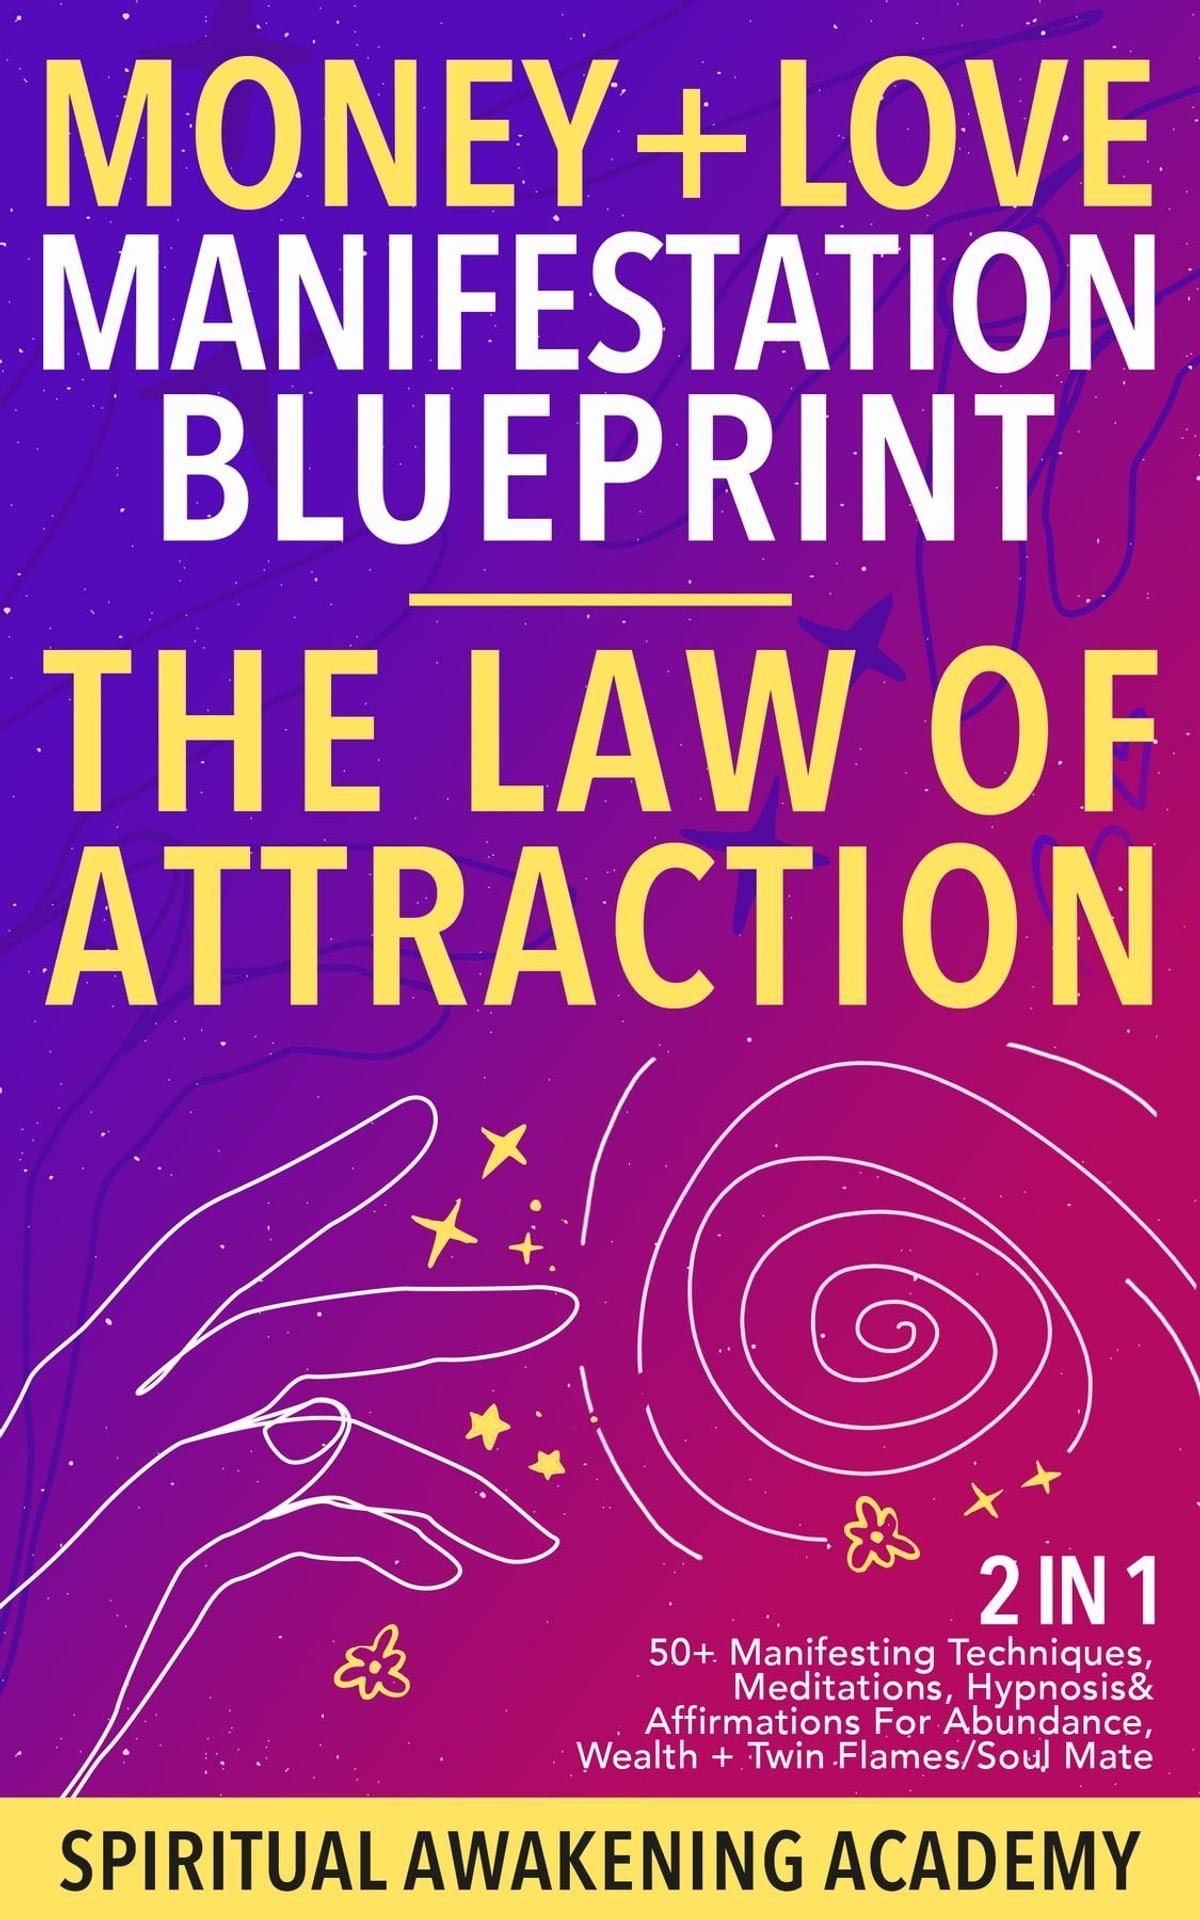 money-love-manifestation-blueprint-the-law-of-attraction-2-in-1-50-manifesting-techniques-meditations-hypnosis-affirmations-for-abundance-wealth-twin-flames-soul-mate